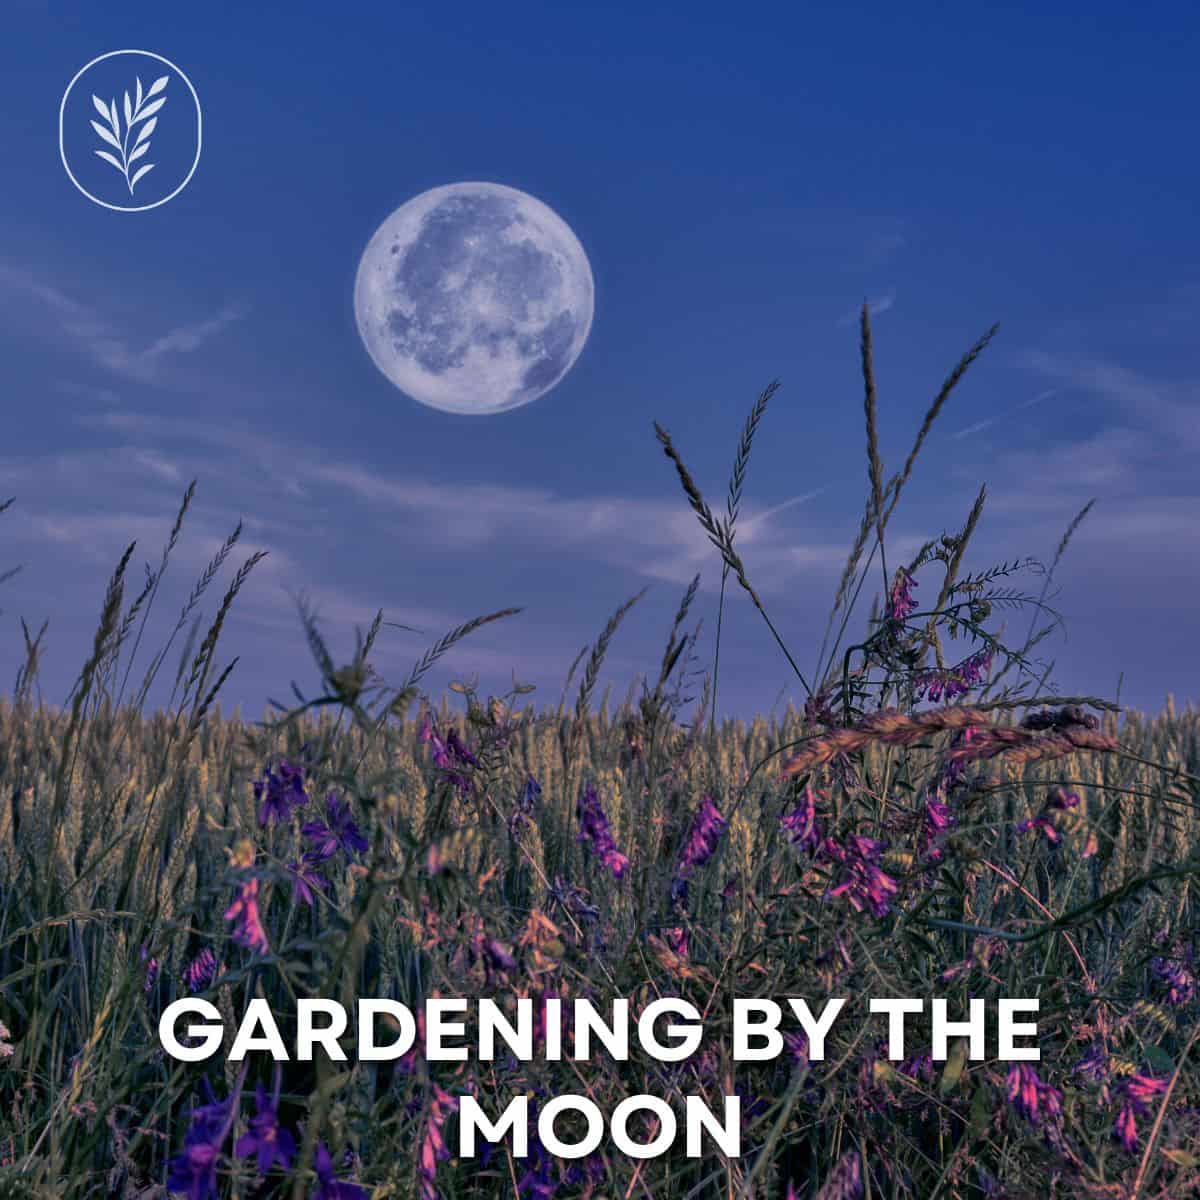 Gardening by the moon via @home4theharvest